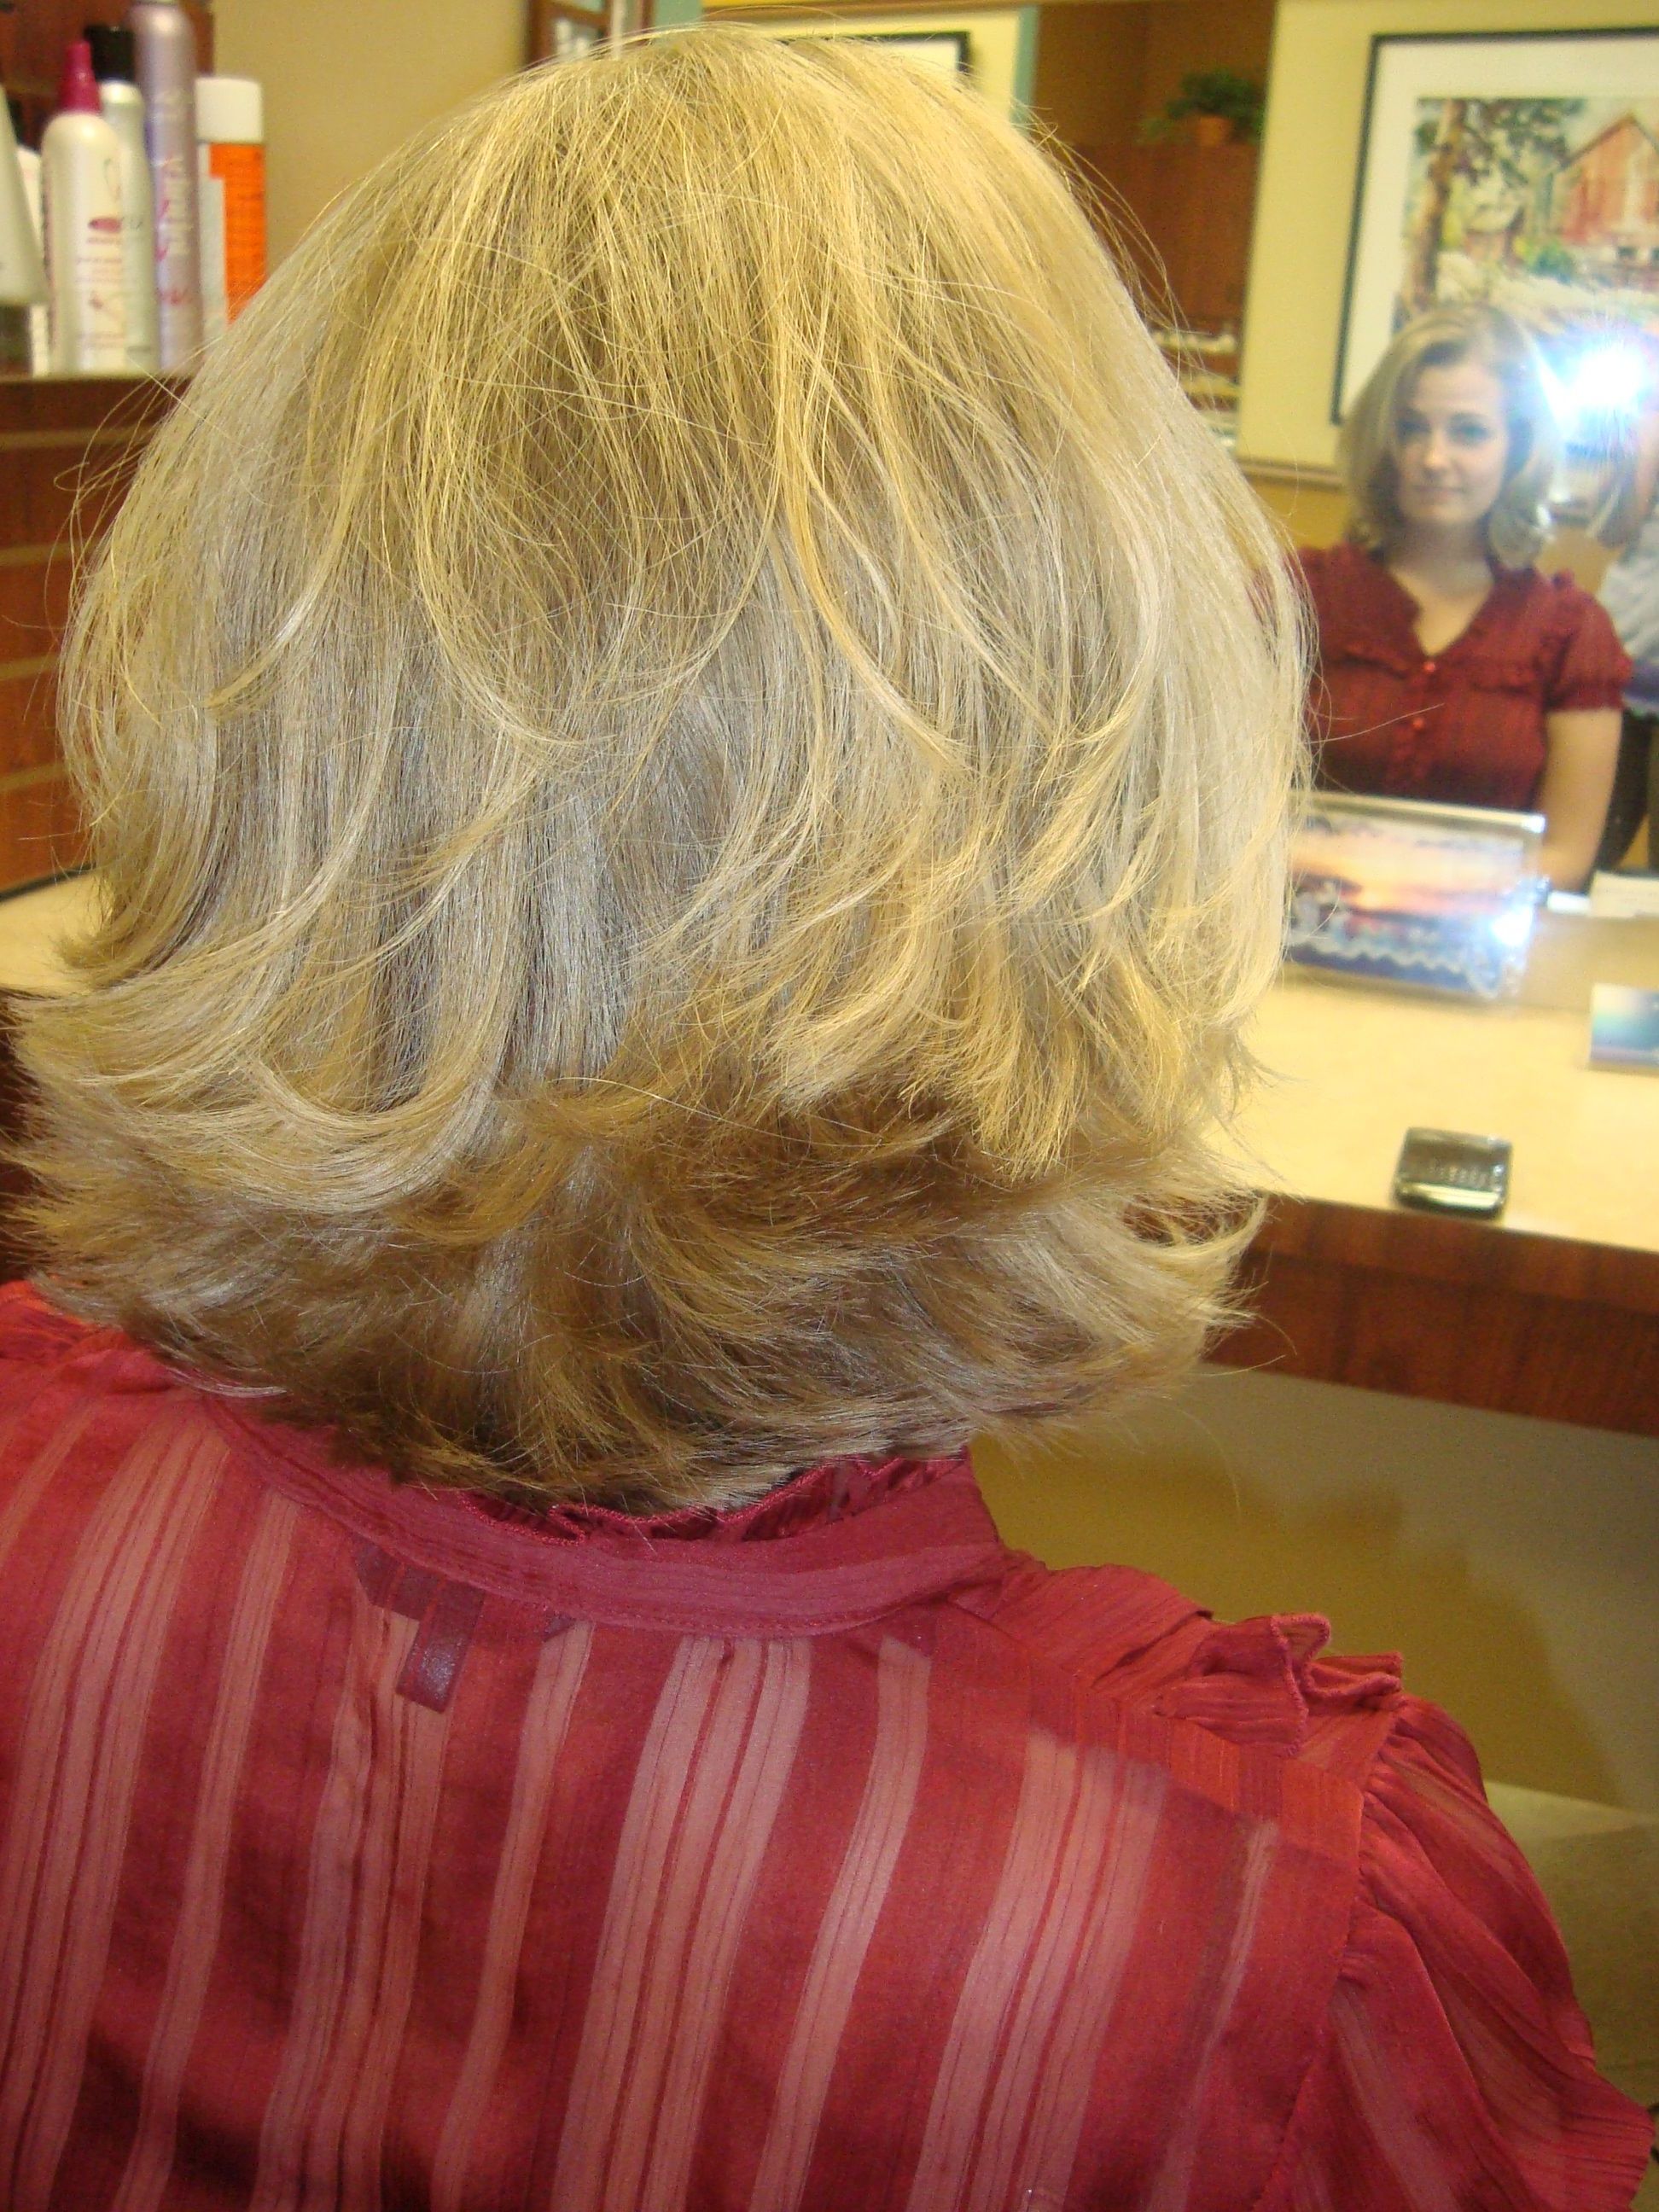 Short, Thick, And Blonde Flipped Hair, Low Maintenance And Cute In Flipped Short Hairstyles (View 4 of 25)